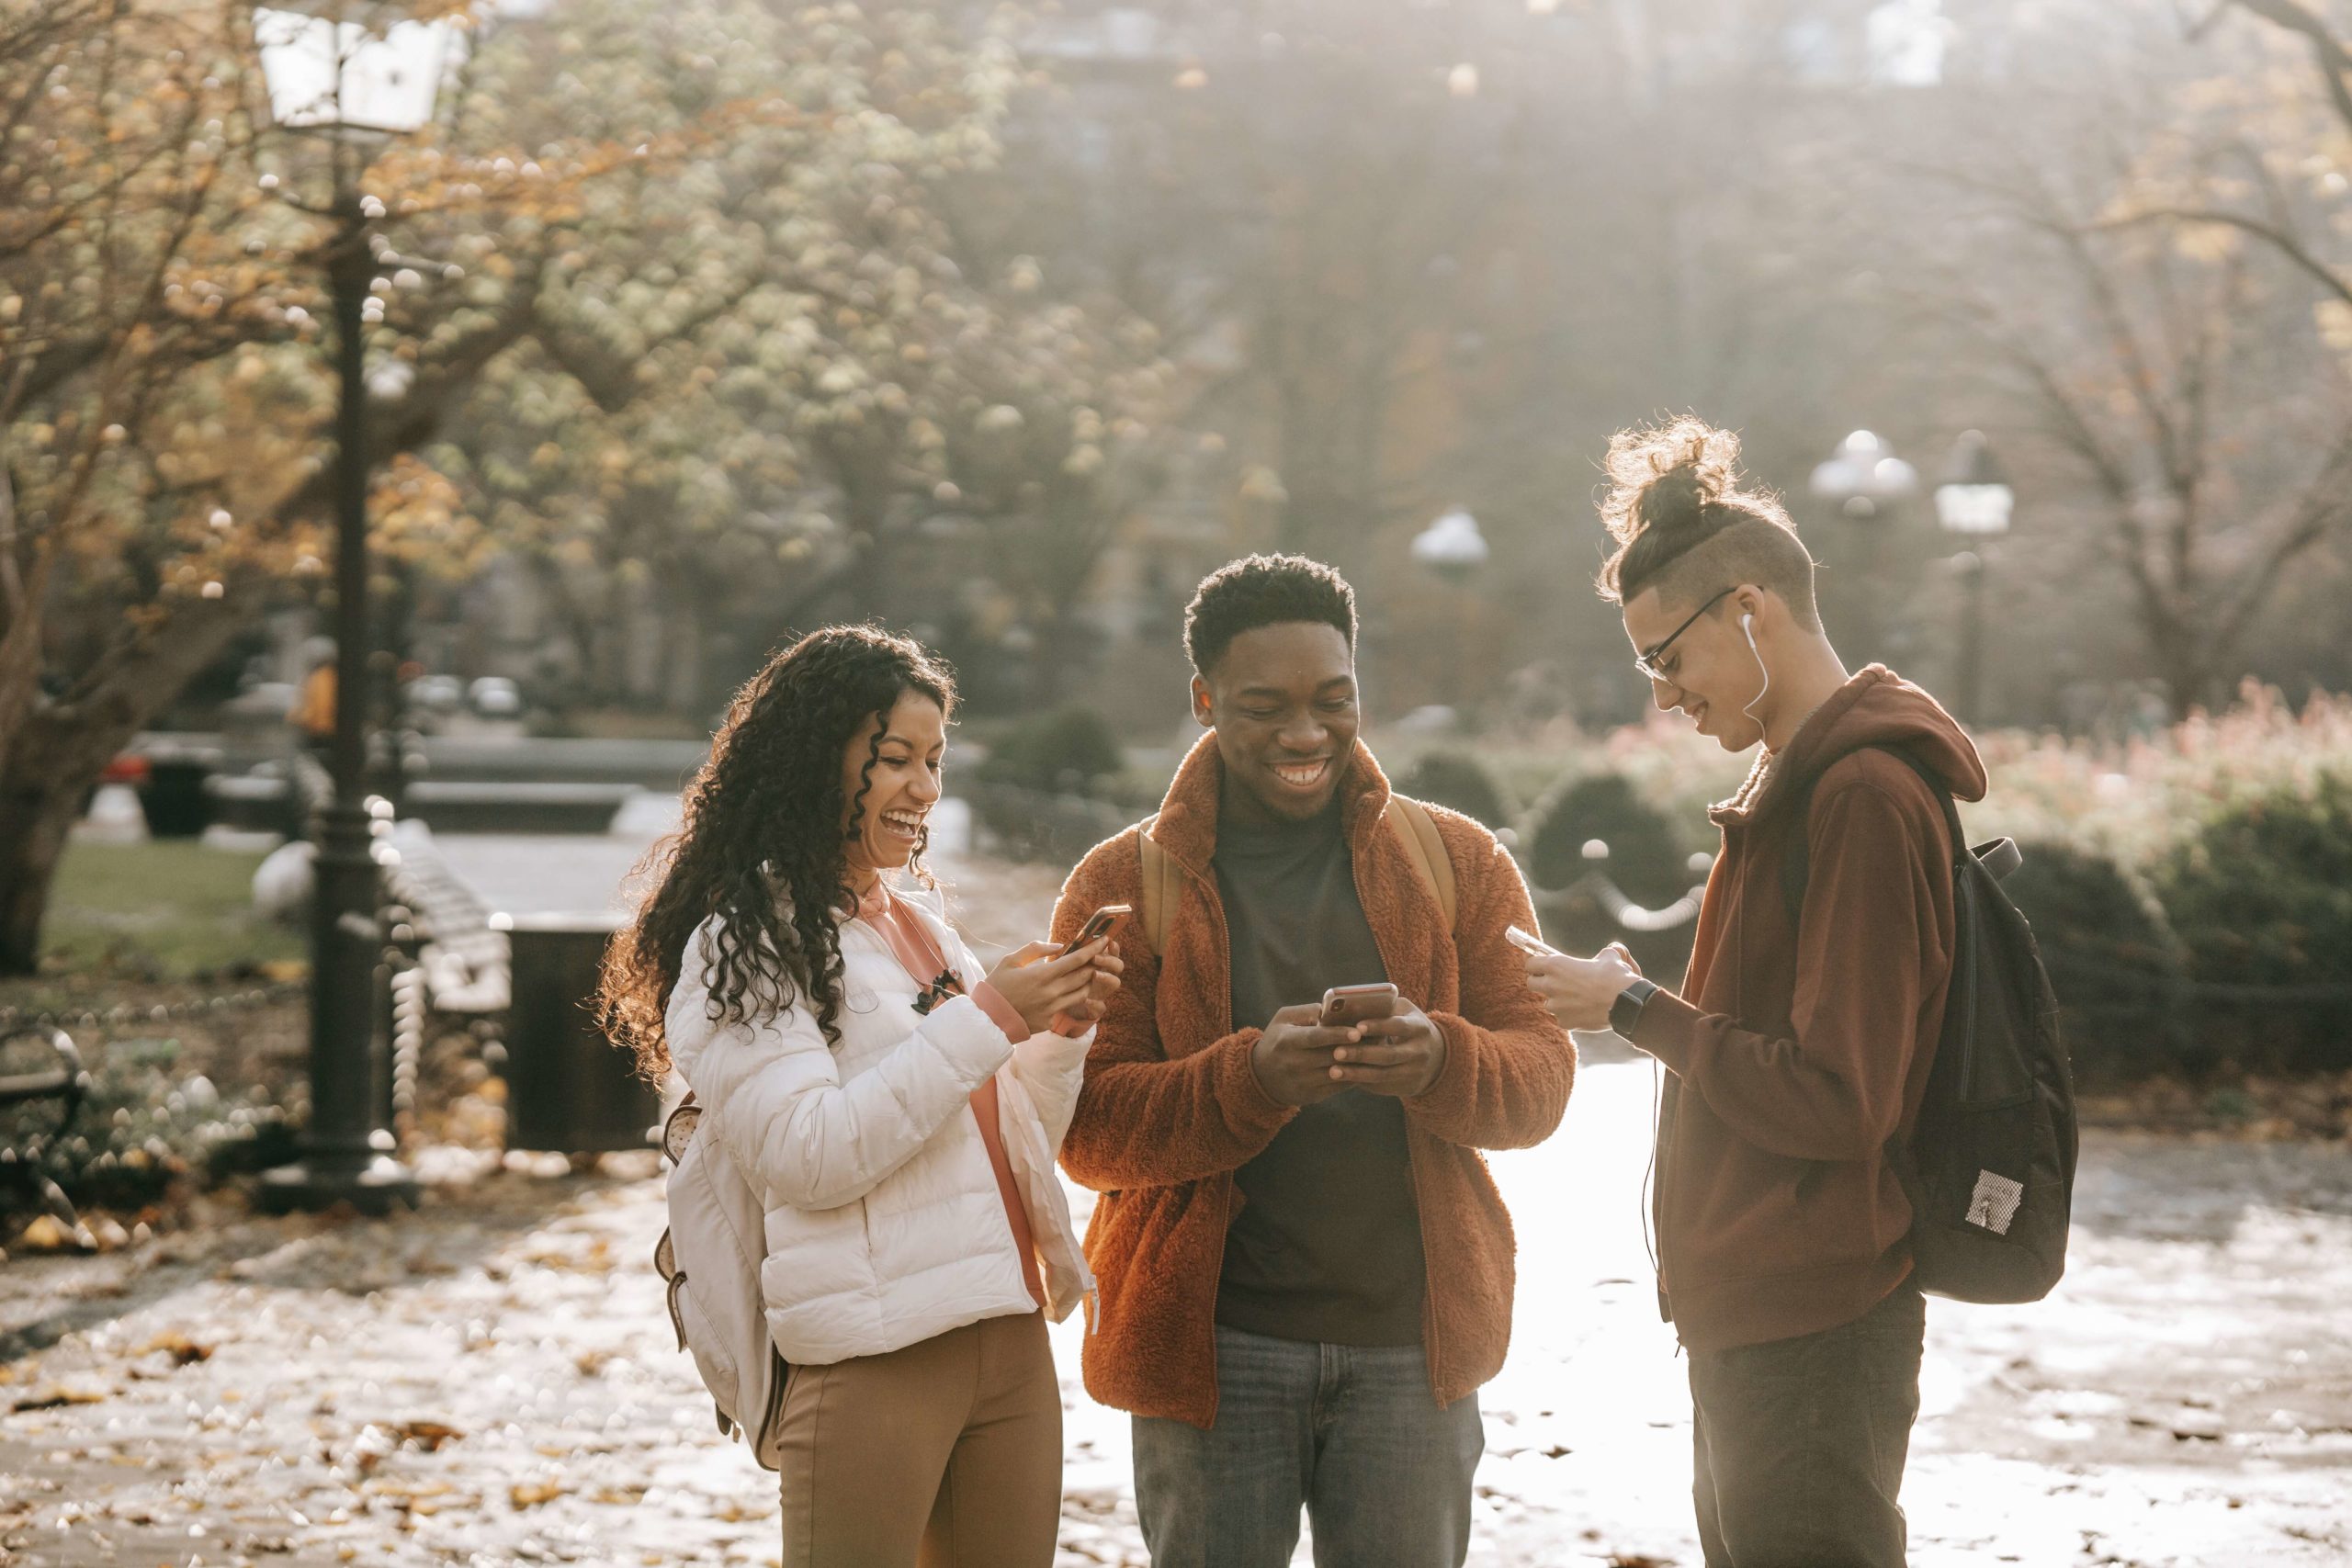 three students standing together, looking at their phones, and laughing